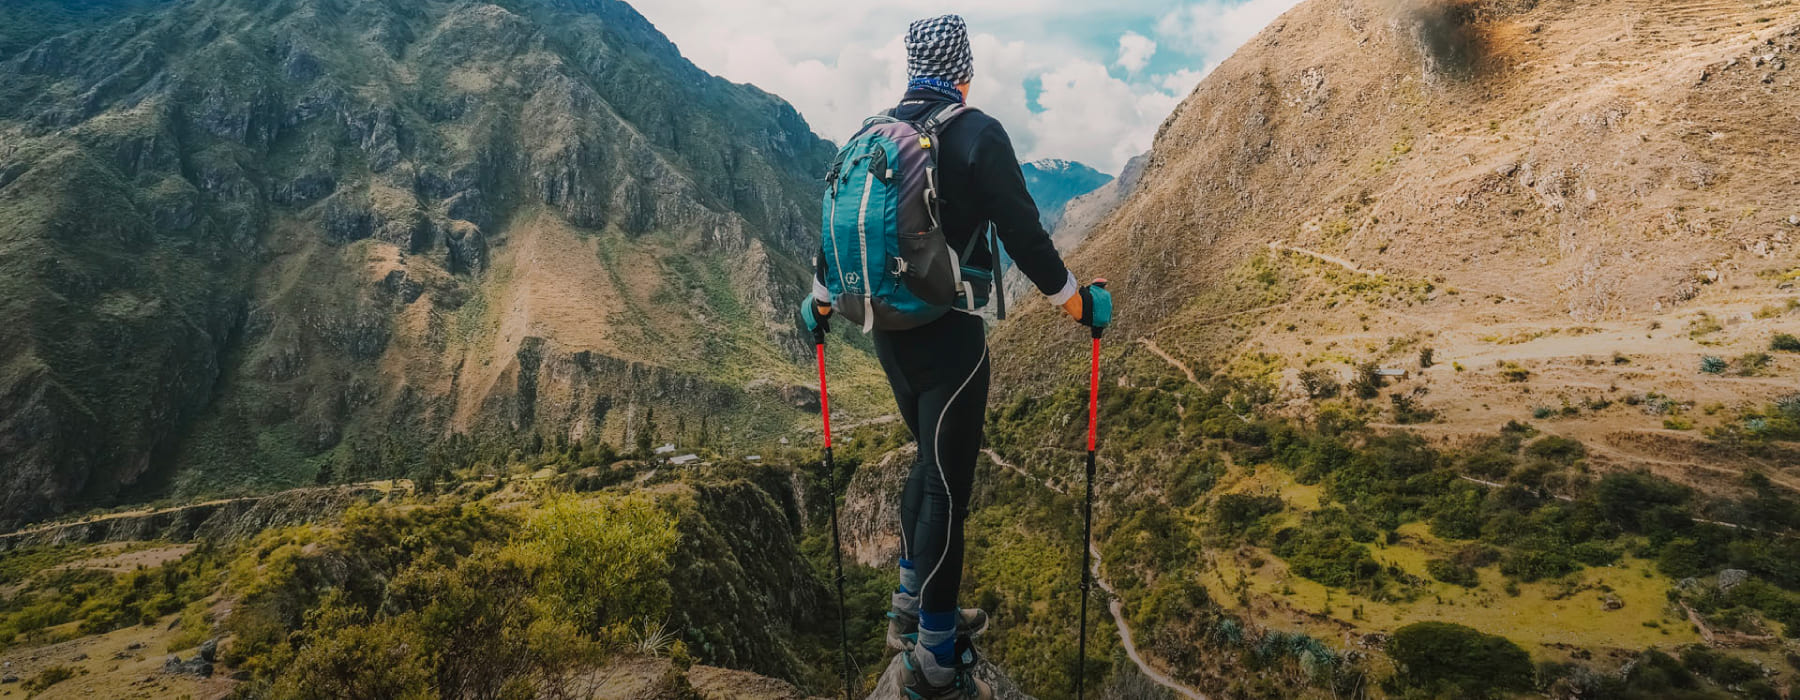 HOW TO CHOOSE YOUR TREKKING POLES?